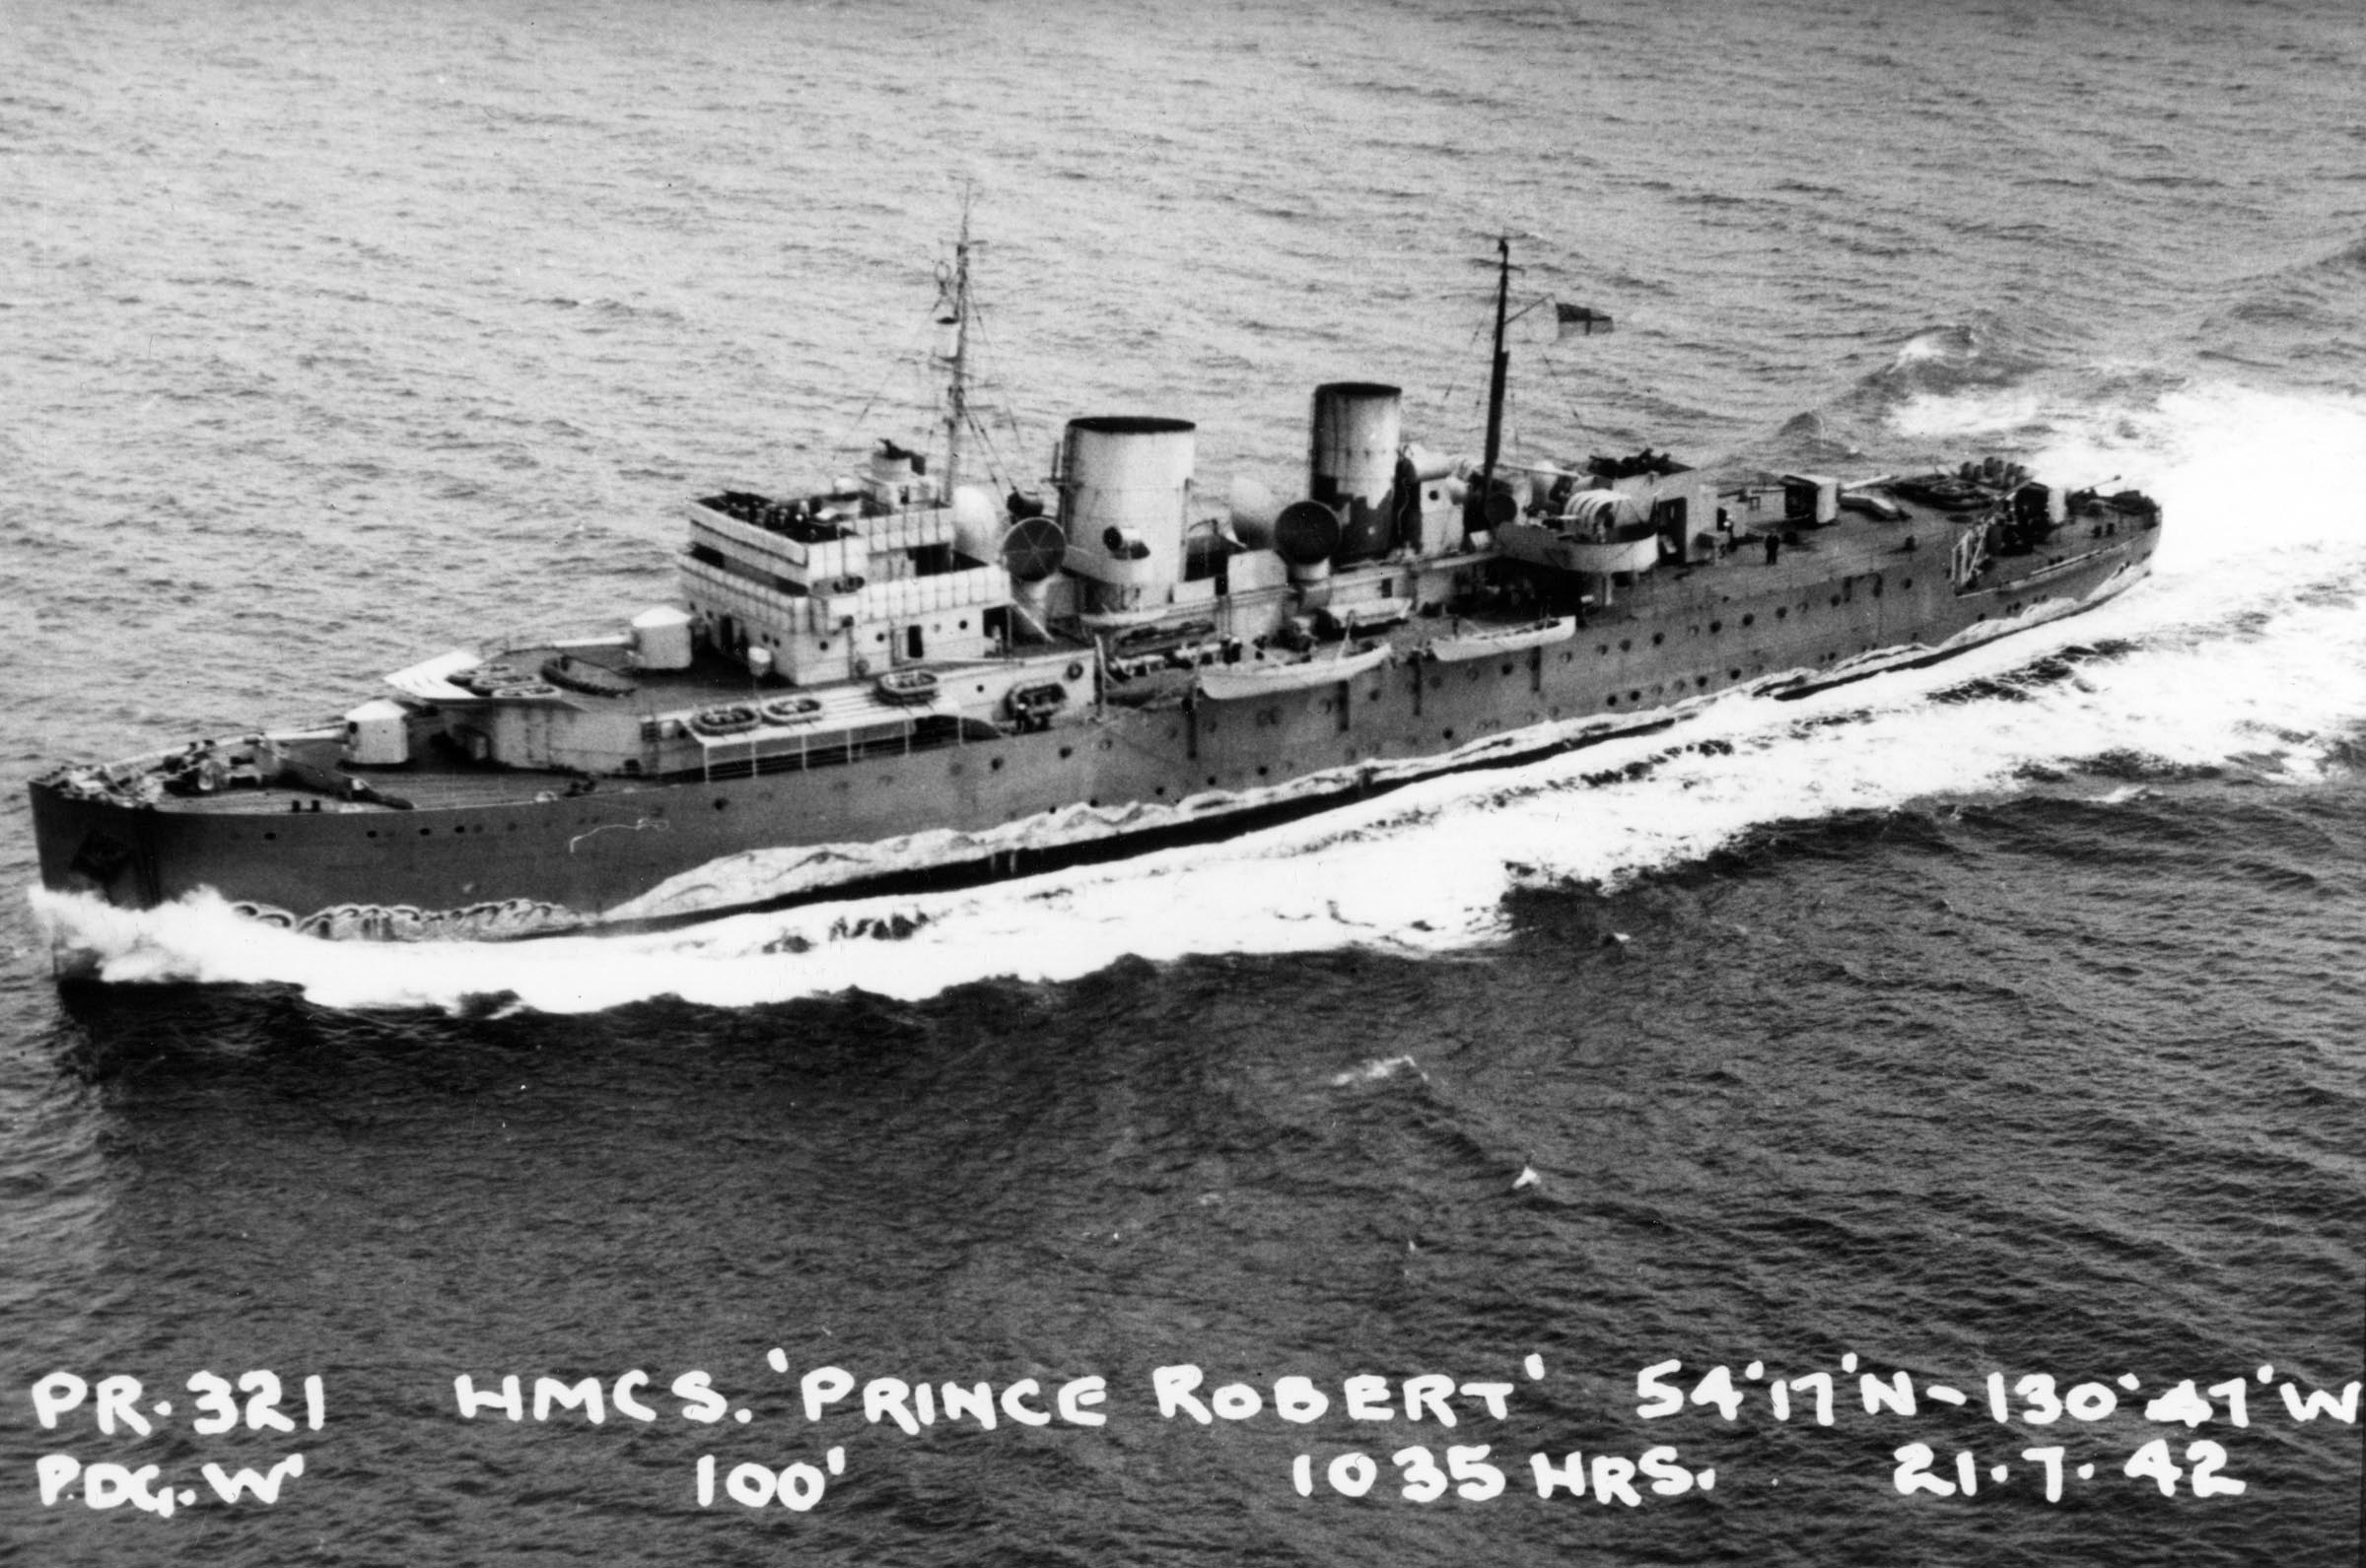 HMCS PRINCE ROBERT off Prince Rupert and steaming east at 1035 hrs 21 July, 1942.